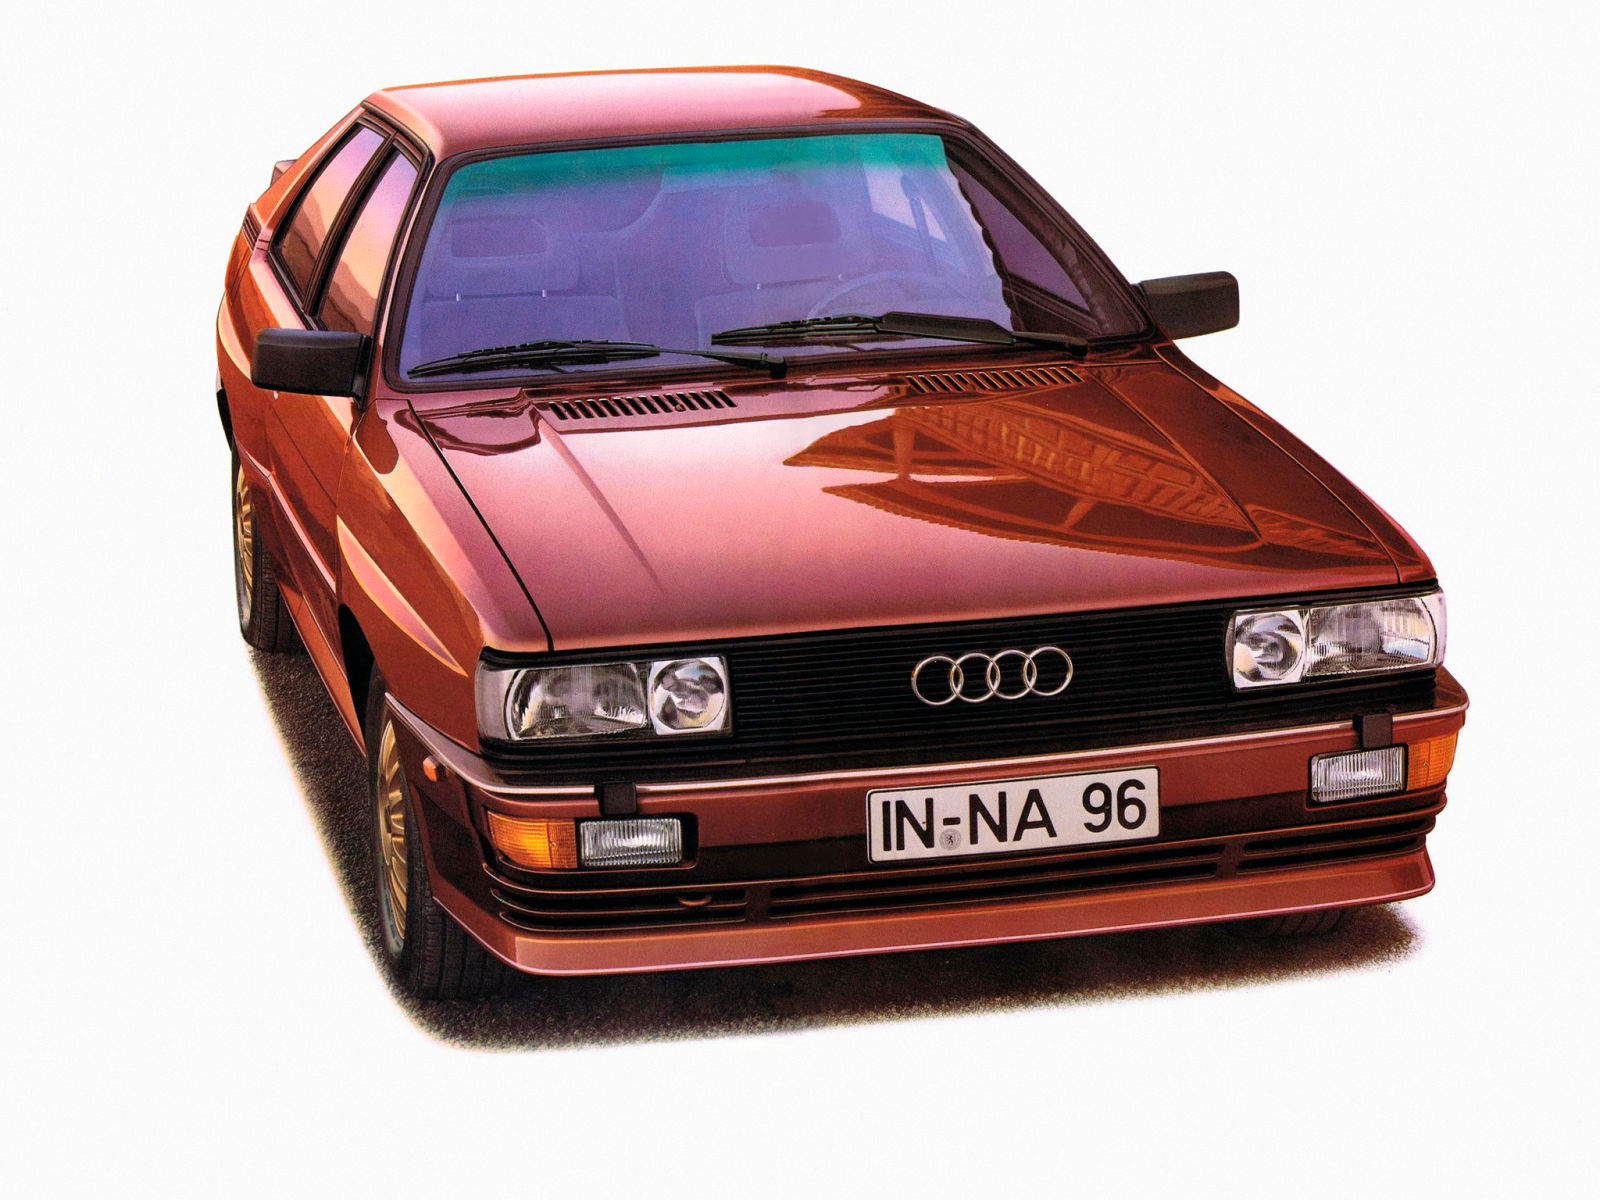 Illustration for article titled 100 Fastest Cars of 1984: 30-21.